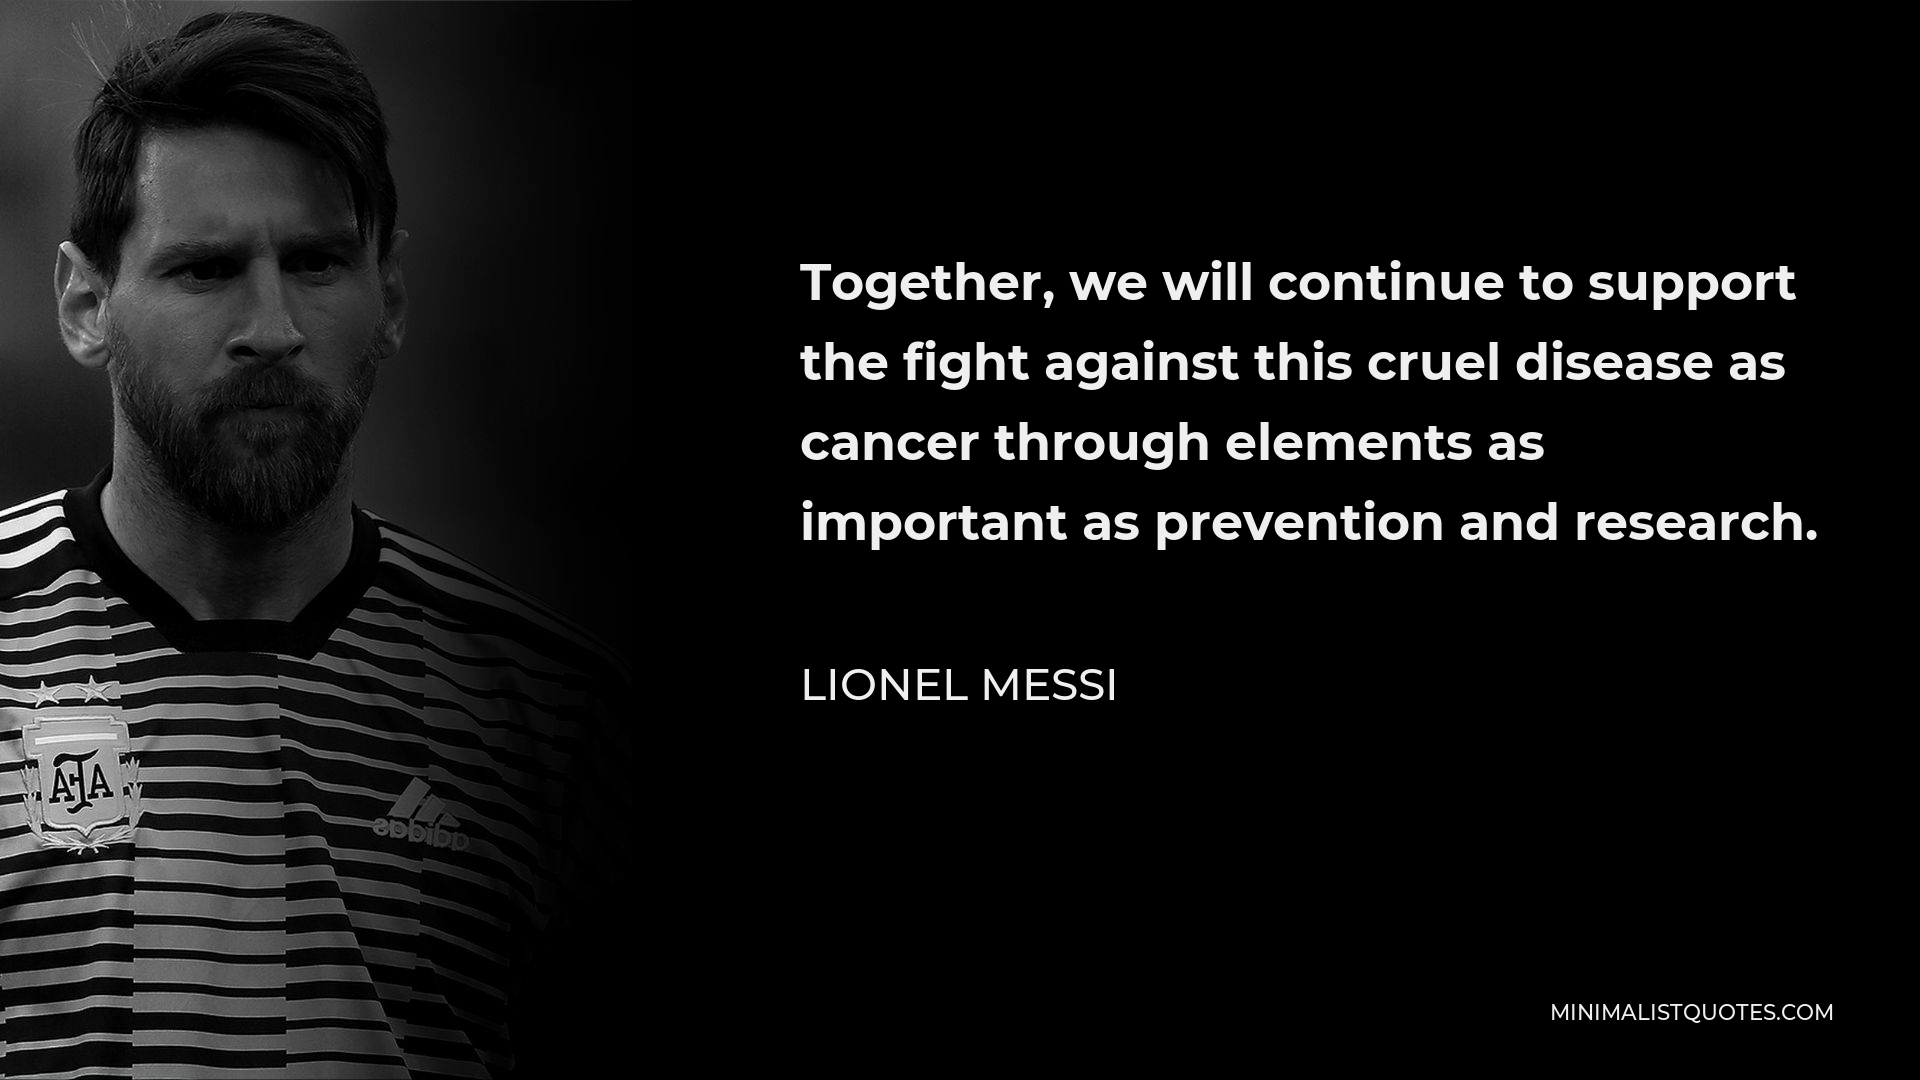 Lionel Messi Quote - Together, we will continue to support the fight against this cruel disease as cancer through elements as important as prevention and research.